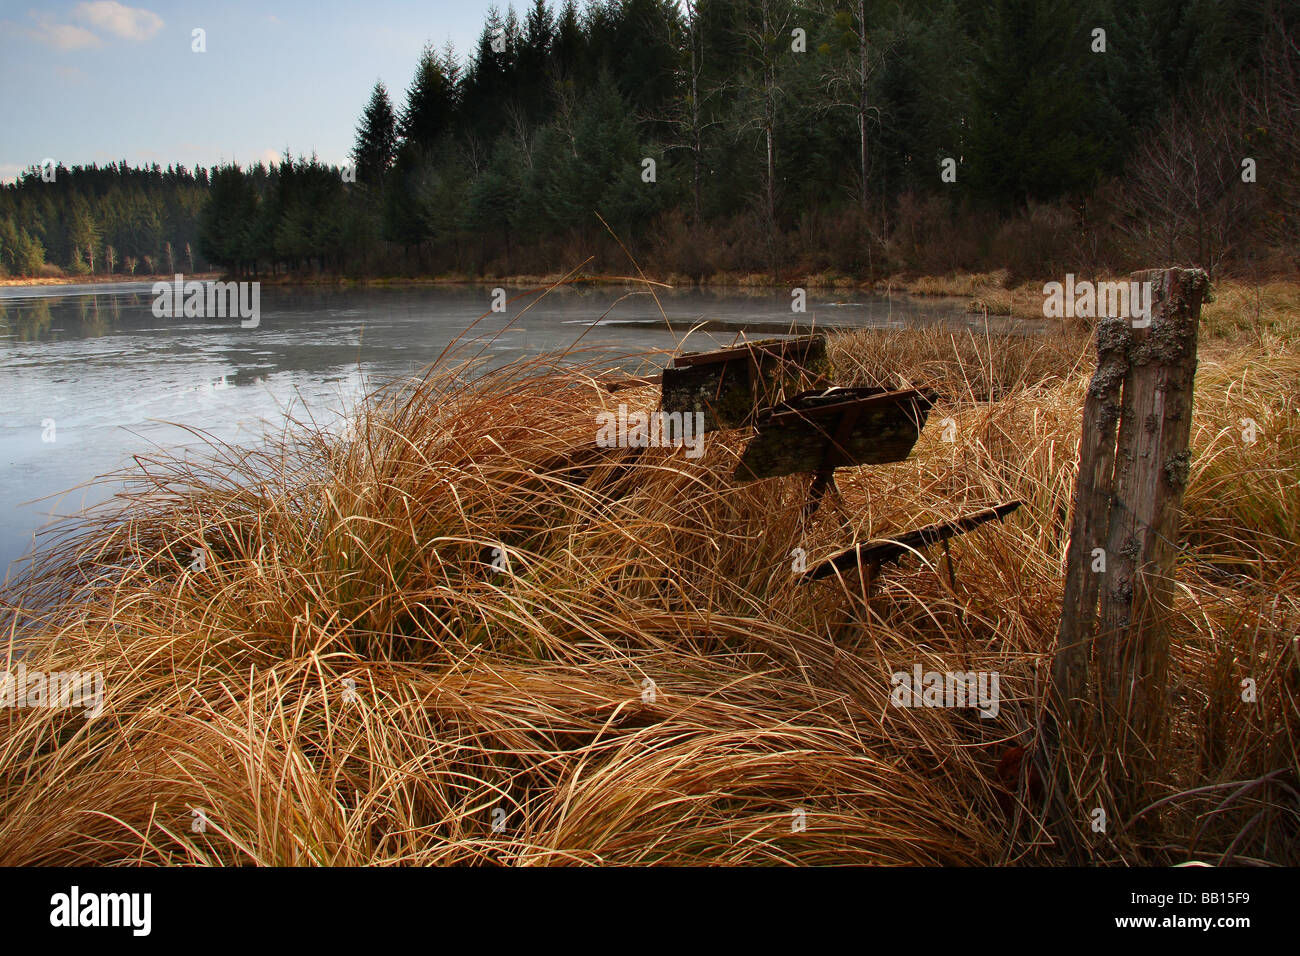 A small rotten water wheel amongst dry grasses at the side of a lake in winter. Limousin. France. Stock Photo